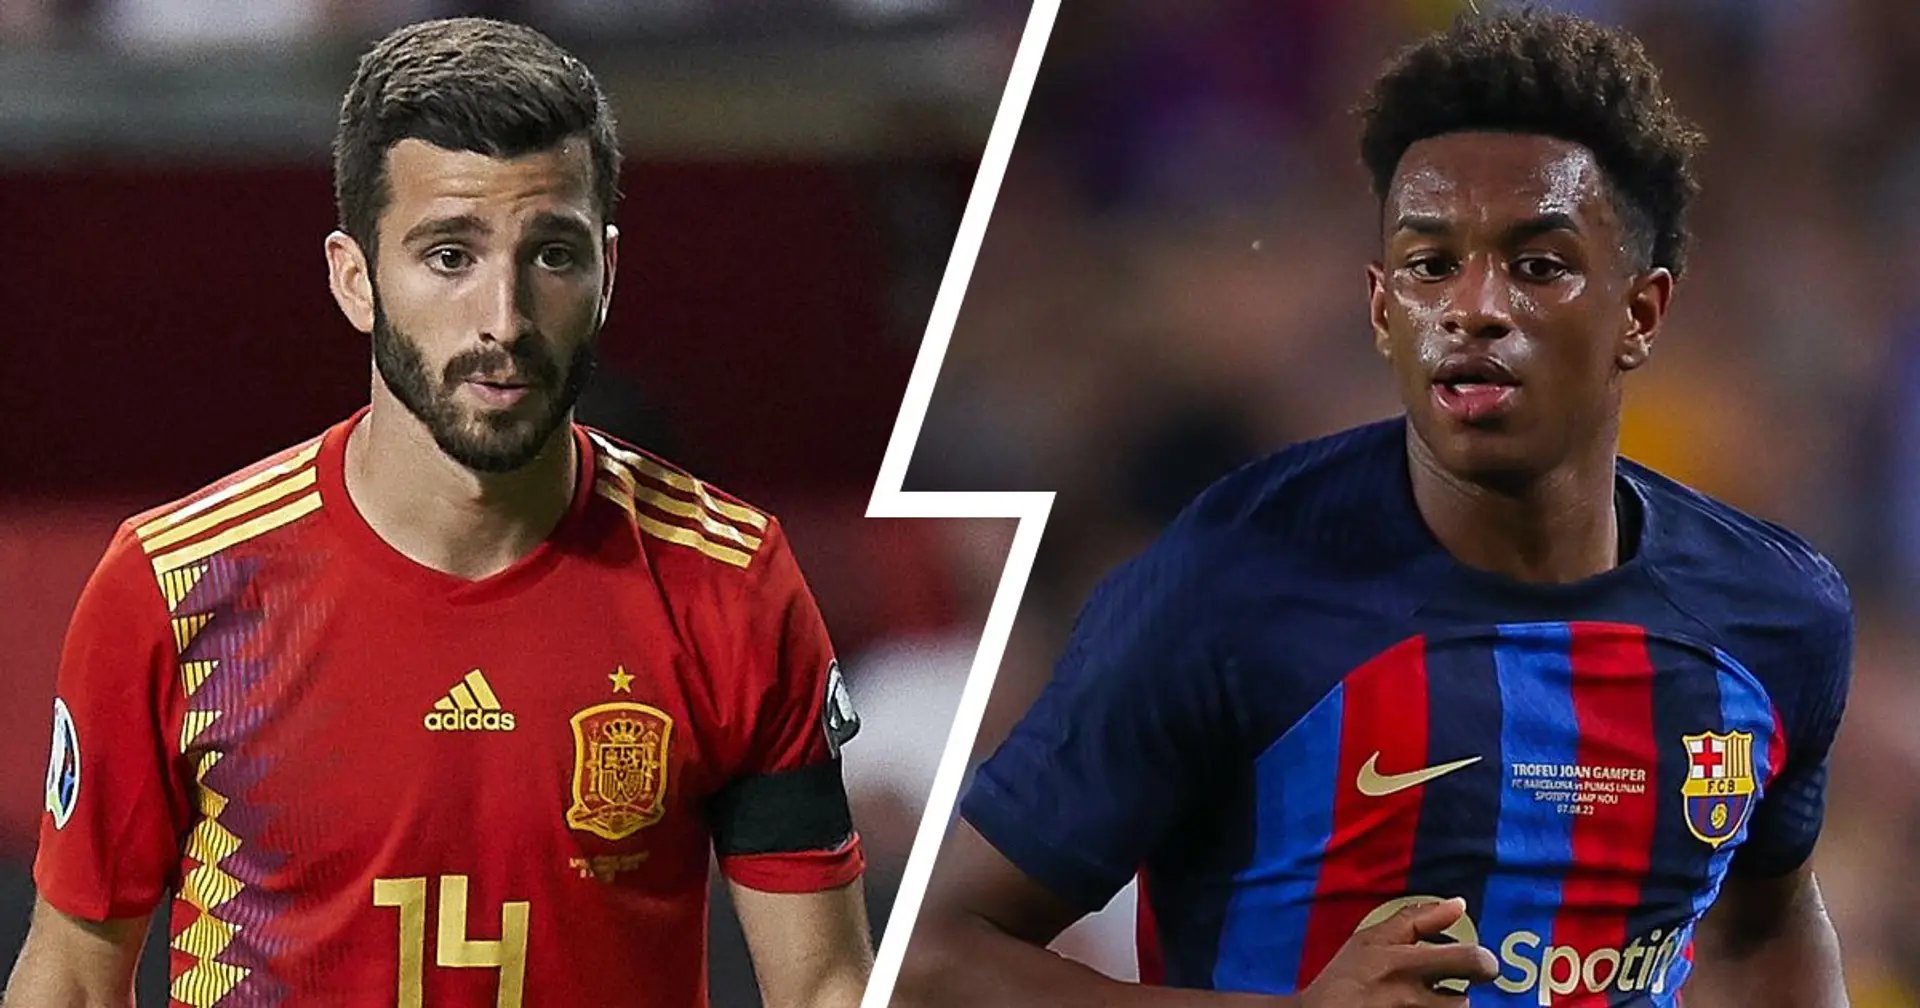 Spain defender Gaya suffers injury – Alonso or Balde likely to replace him